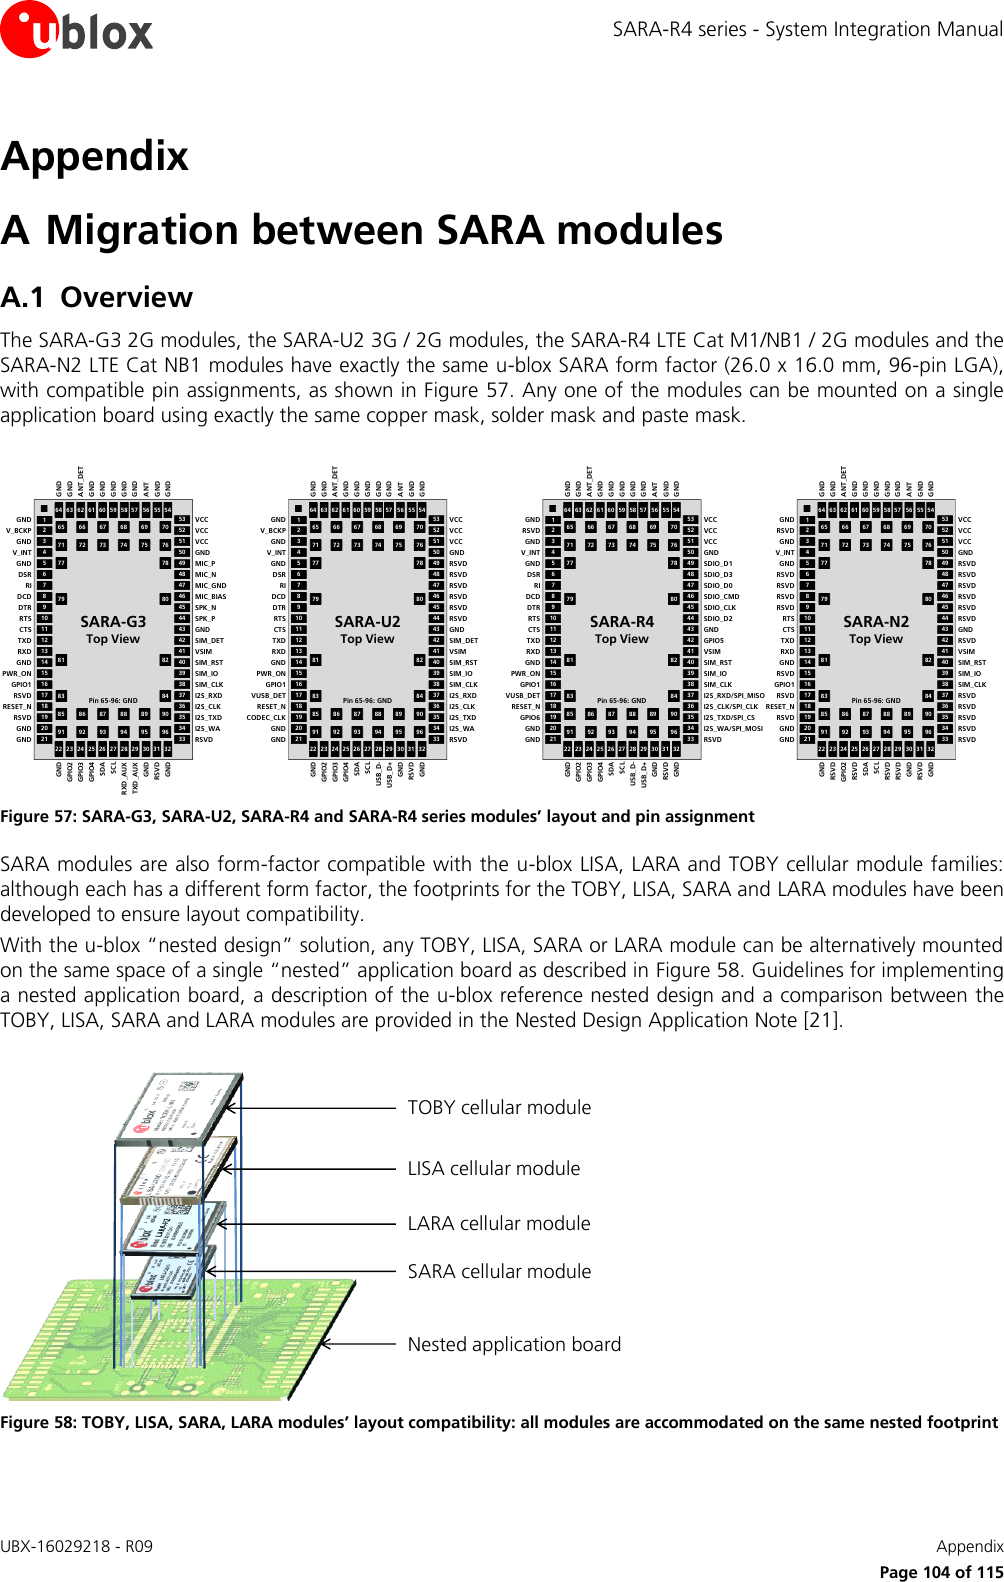 SARA-R4 series - System Integration Manual UBX-16029218 - R09    Appendix      Page 104 of 115 Appendix A Migration between SARA modules A.1 Overview The SARA-G3 2G modules, the SARA-U2 3G / 2G modules, the SARA-R4 LTE Cat M1/NB1 / 2G modules and the SARA-N2 LTE Cat NB1 modules have exactly the same u-blox SARA form factor (26.0 x 16.0 mm, 96-pin LGA), with compatible pin assignments, as shown in Figure 57. Any one of the modules can be mounted on a single application board using exactly the same copper mask, solder mask and paste mask.  64 63 61 60 58 57 55 5422 23 25 26 28 29 31 3211108754212119181615131243444647495052533335363839414265 66 67 68 69 7071 72 73 74 75 7677 7879 8081 8283 8485 86 87 88 89 9091 92 93 94 95 96CTSRTSDCDRIV_INTRSVDGNDGPIO6RESET_NGPIO1PWR_ONRXDTXD32017149624 27 305148454037345962 56GNDGNDDSRDTRGNDVUSB_DETGNDGNDUSB_D-USB_D+RSVDGNDGPIO2GPIO3SDASCLGPIO4GNDGNDGNDSDIO_D2SDIO_CMDSDIO_D0SDIO_D1GNDVCCVCCRSVDI2S_TXD/SPI_CSI2S_CLK/SPI_CLKSIM_CLKSIM_IOVSIMGPIO5VCCSDIO_D3SDIO_CLKSIM_RSTI2S_RXD/SPI_MISOI2S_WA/SPI_MOSIGNDGNDGNDGNDGNDGNDGNDGNDGNDANT_DETANTSARA-R4Top ViewPin 65-96: GND64 63 61 60 58 57 55 5422 23 25 26 28 29 31 3211108754212119181615131243444647495052533335363839414265 66 67 68 69 7071 72 73 74 75 7677 7879 8081 8283 8485 86 87 88 89 9091 92 93 94 95 96CTSRTSDCDRIV_INTV_BCKPGNDRSVDRESET_NGPIO1PWR_ONRXDTXD32017149624 27 305148454037345962 56GNDGNDDSRDTRGNDRSVDGNDGNDRXD_AUXTXD_AUXRSVDGNDGPIO2GPIO3SDASCLGPIO4GNDGNDGNDSPK_PMIC_BIASMIC_GNDMIC_PGNDVCCVCCRSVDI2S_TXDI2S_CLKSIM_CLKSIM_IOVSIMSIM_DETVCCMIC_NSPK_NSIM_RSTI2S_RXDI2S_WAGNDGNDGNDGNDGNDGNDGNDGNDGNDANT_DETANTSARA-G3Top ViewPin 65-96: GND64 63 61 60 58 57 55 5422 23 25 26 28 29 31 3211108754212119181615131243444647495052533335363839414265 66 67 68 69 7071 72 73 74 75 7677 7879 8081 8283 8485 86 87 88 89 9091 92 93 94 95 96CTSRTSDCDRIV_INTV_BCKPGNDCODEC_CLKRESET_NGPIO1PWR_ONRXDTXD32017149624 27 305148454037345962 56GNDGNDDSRDTRGNDVUSB_DETGNDGNDUSB_D-USB_D+RSVDGNDGPIO2GPIO3SDASCLGPIO4GNDGNDGNDRSVDRSVDRSVDRSVDGNDVCCVCCRSVDI2S_TXDI2S_CLKSIM_CLKSIM_IOVSIMSIM_DETVCCRSVDRSVDSIM_RSTI2S_RXDI2S_WAGNDGNDGNDGNDGNDGNDGNDGNDGNDANT_DETANTSARA-U2Top ViewPin 65-96: GND64 63 61 60 58 57 55 5422 23 25 26 28 29 31 3211108754212119181615131243444647495052533335363839414265 66 67 68 69 7071 72 73 74 75 7677 7879 8081 8283 8485 86 87 88 89 9091 92 93 94 95 96CTSRTSRSVDRSVDV_INTRSVDGNDRSVDRESET_NGPIO1RSVDRXDTXD32017149624 27 305148454037345962 56GNDGNDRSVDRSVDGNDRSVDGNDGNDRSVDRSVDRSVDGNDRSVDGPIO2SDASCLRSVDGNDGNDGNDRSVDRSVDRSVDRSVDGNDVCCVCCRSVDRSVDRSVDSIM_CLKSIM_IOVSIMRSVDVCCRSVDRSVDSIM_RSTRSVDRSVDGNDGNDGNDGNDGNDGNDGNDGNDGNDANT_DETANTSARA-N2Top ViewPin 65-96: GND Figure 57: SARA-G3, SARA-U2, SARA-R4 and SARA-R4 series modules’ layout and pin assignment SARA modules are also form-factor compatible with the u-blox LISA, LARA and TOBY cellular module families: although each has a different form factor, the footprints for the TOBY, LISA, SARA and LARA modules have been developed to ensure layout compatibility. With the u-blox “nested design” solution, any TOBY, LISA, SARA or LARA module can be alternatively mounted on the same space of a single “nested” application board as described in Figure 58. Guidelines for implementing a nested application board, a description of the u-blox reference nested design and a comparison between the TOBY, LISA, SARA and LARA modules are provided in the Nested Design Application Note [21].  LISA cellular moduleLARA cellular moduleSARA cellular moduleNested application boardTOBY cellular module Figure 58: TOBY, LISA, SARA, LARA modules’ layout compatibility: all modules are accommodated on the same nested footprint 